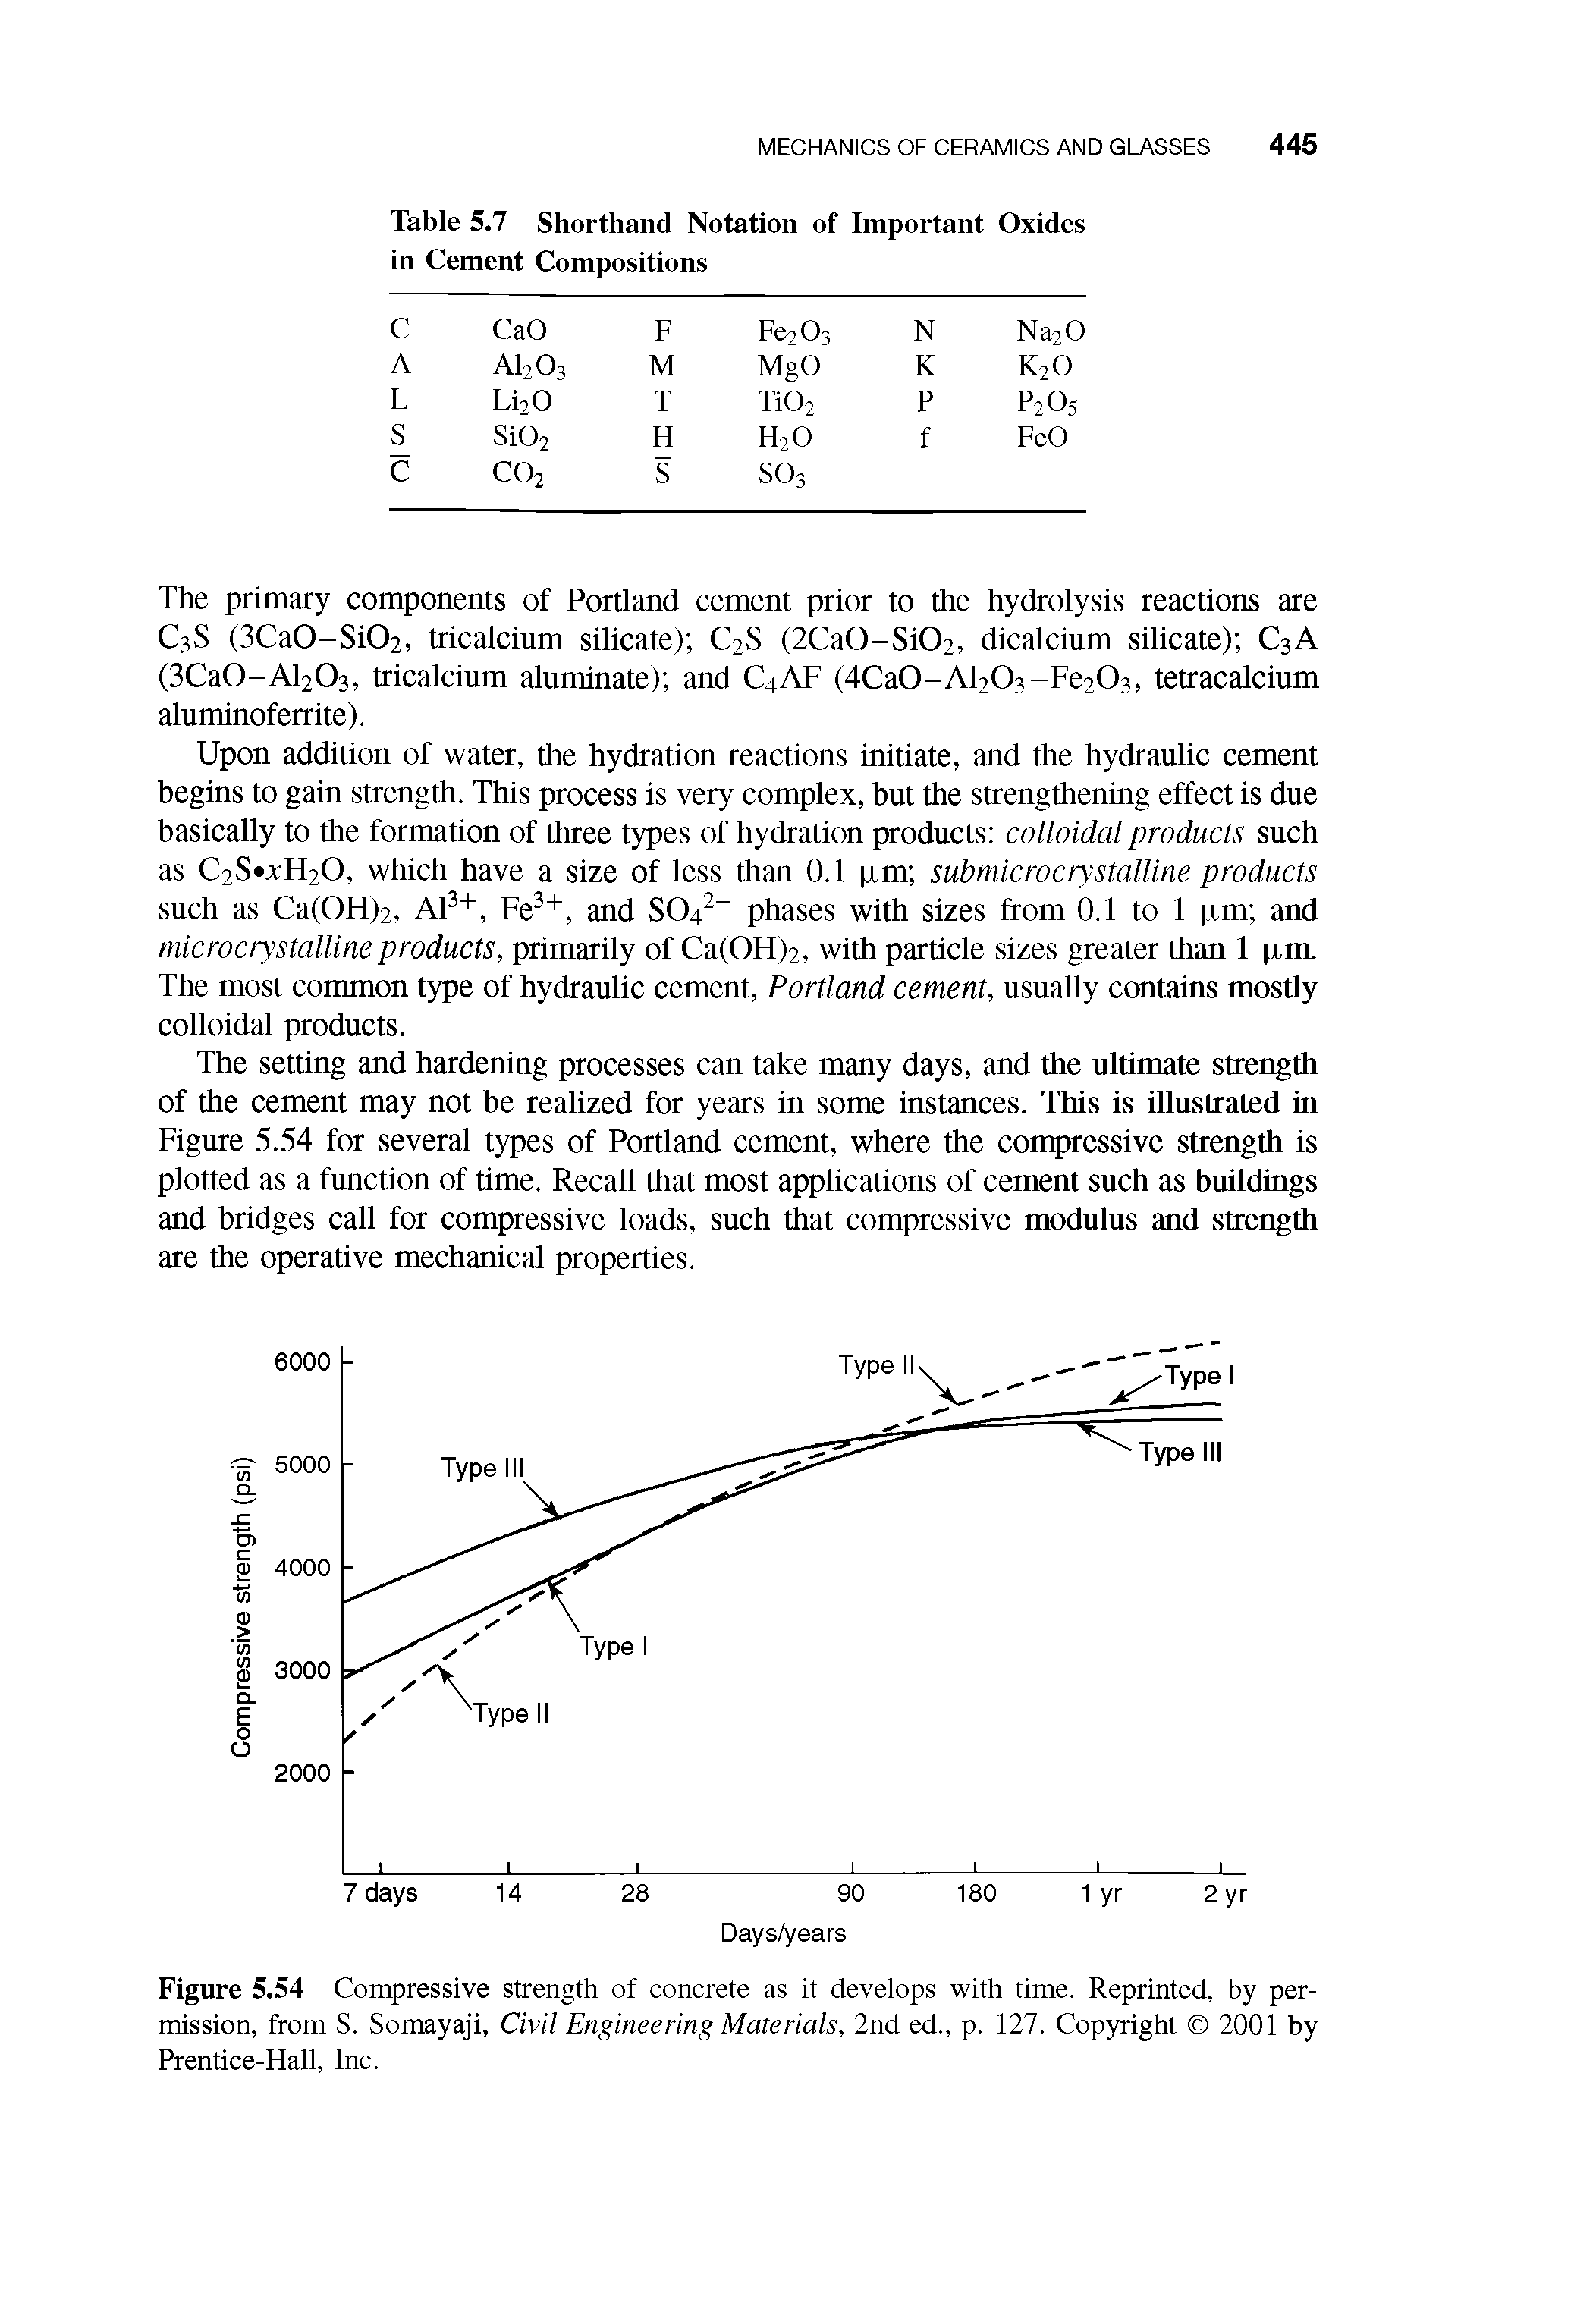 Figure 5.54 Compressive strength of concrete as it develops with time. Reprinted, by permission, from S. Somayaji, Civil Engineering Materials, 2nd ed., p. 127. Copyright 2001 by Prentice-Hall, Inc.